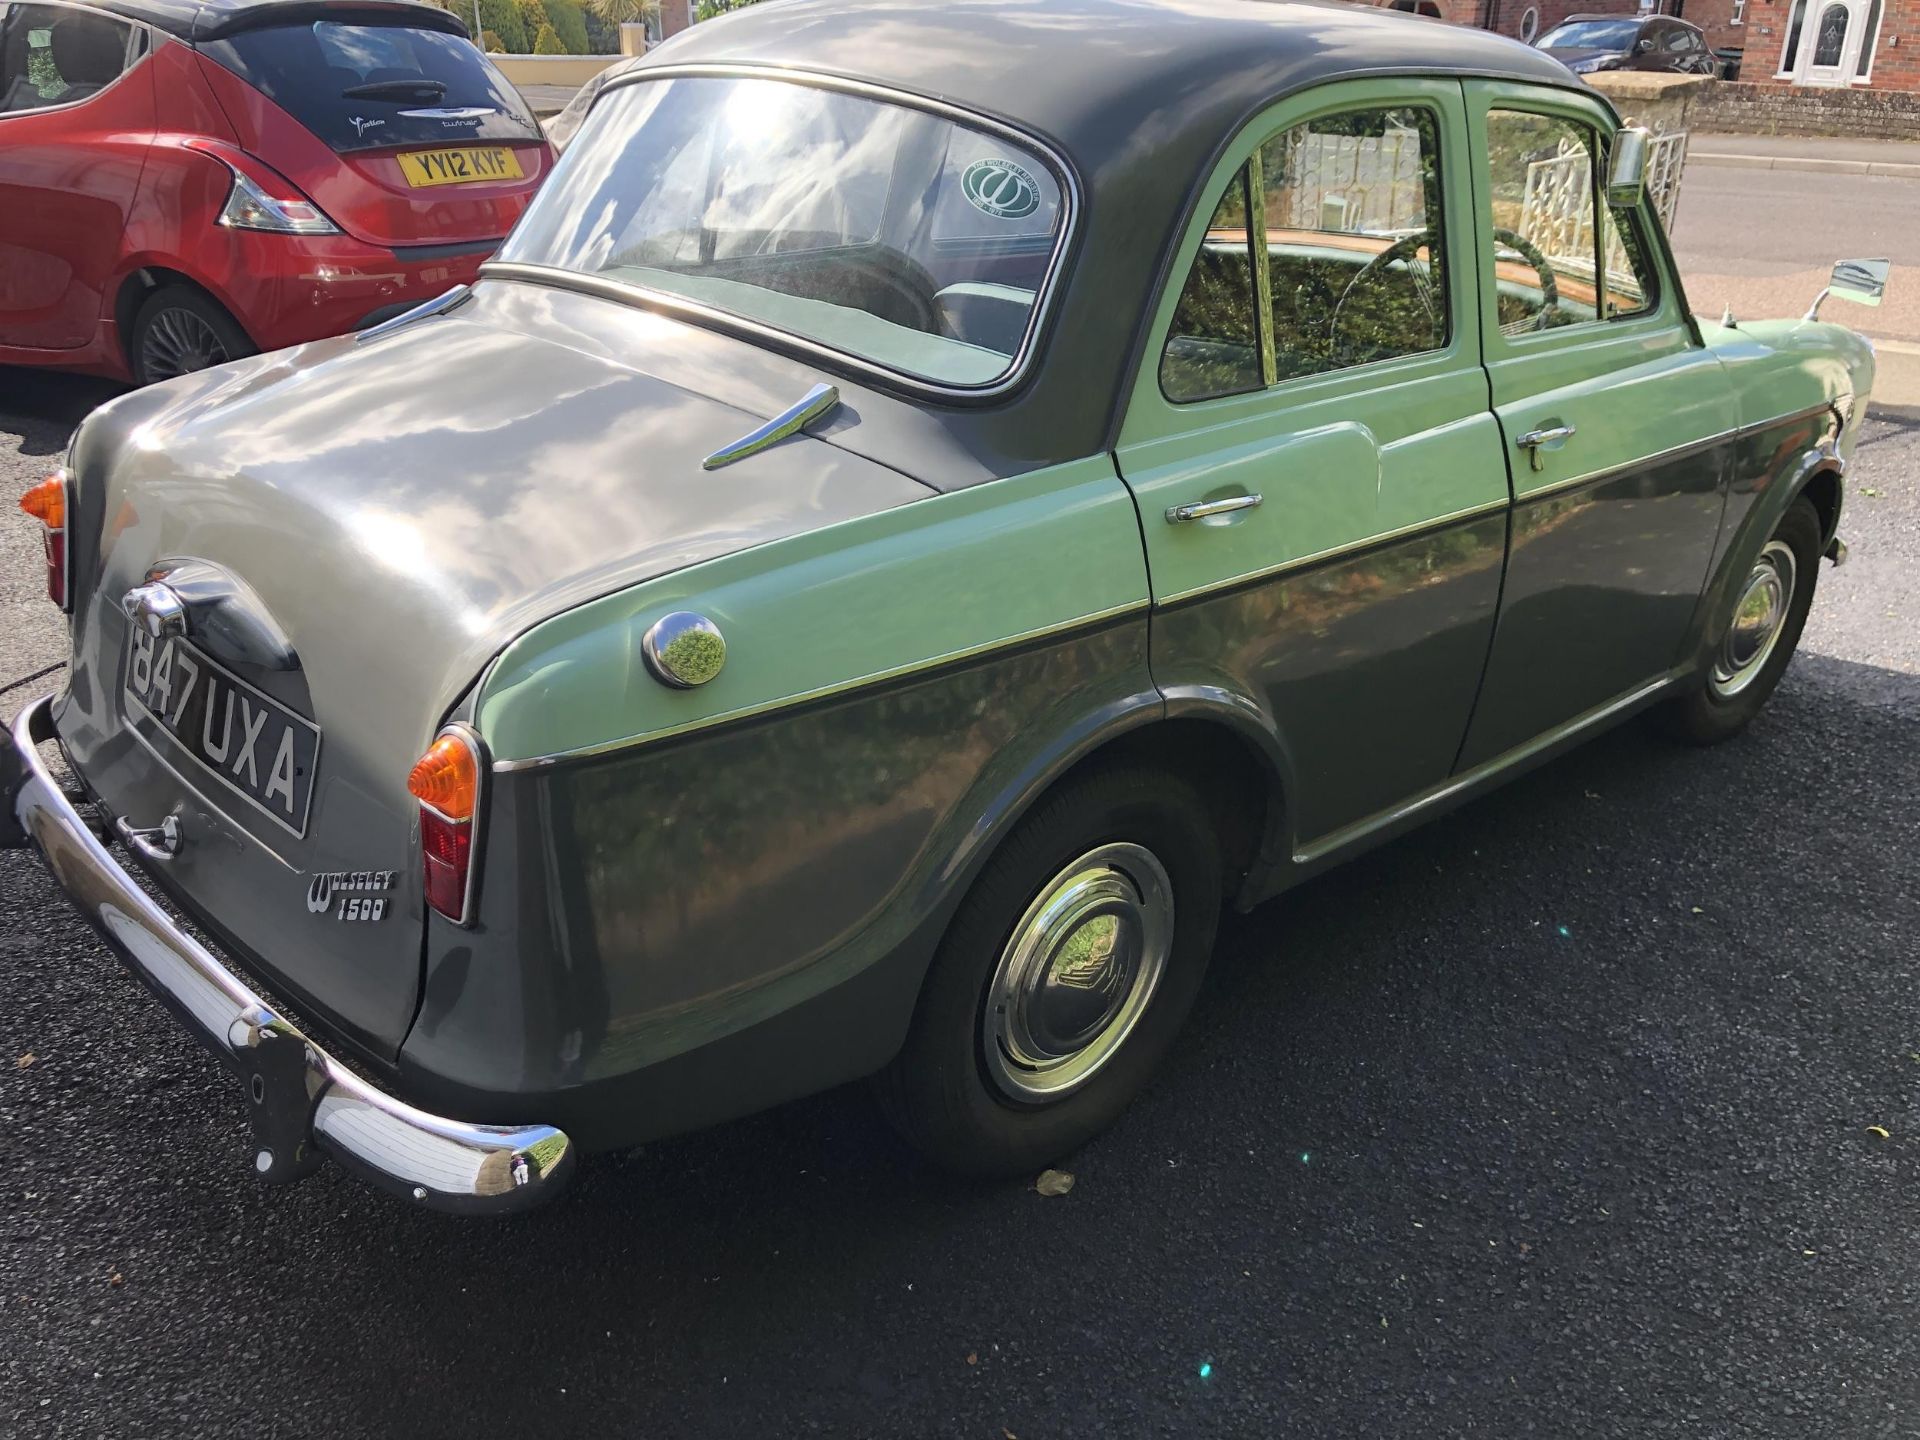 1958 Wolseley 1500 Registration number 847 UXA Chassis number WA1-L-9305 Engine number 15WA-U- - Image 6 of 43